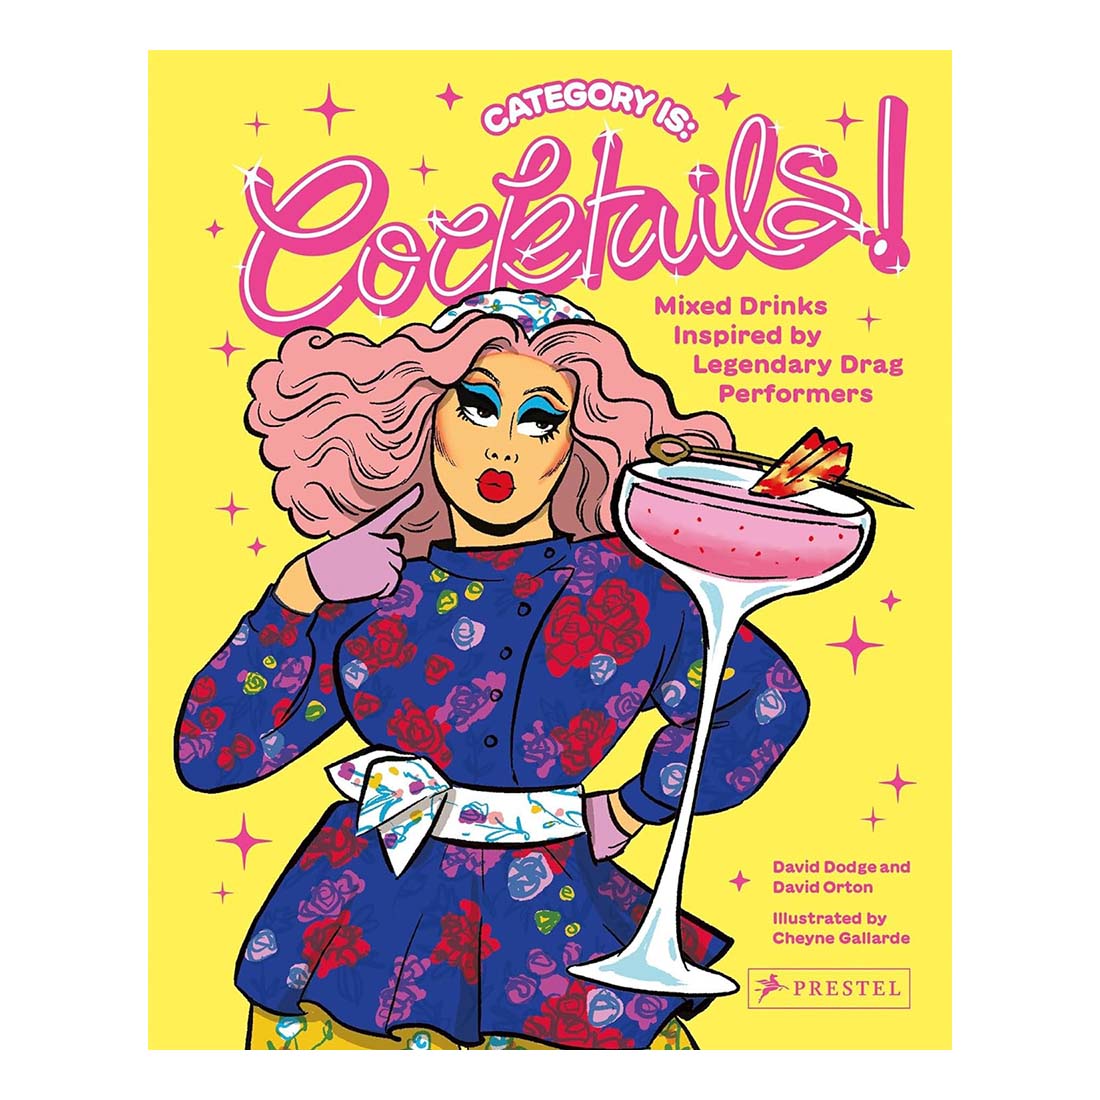 Category is Cocktails! Mixed Drinks Inspired by Drag Legends